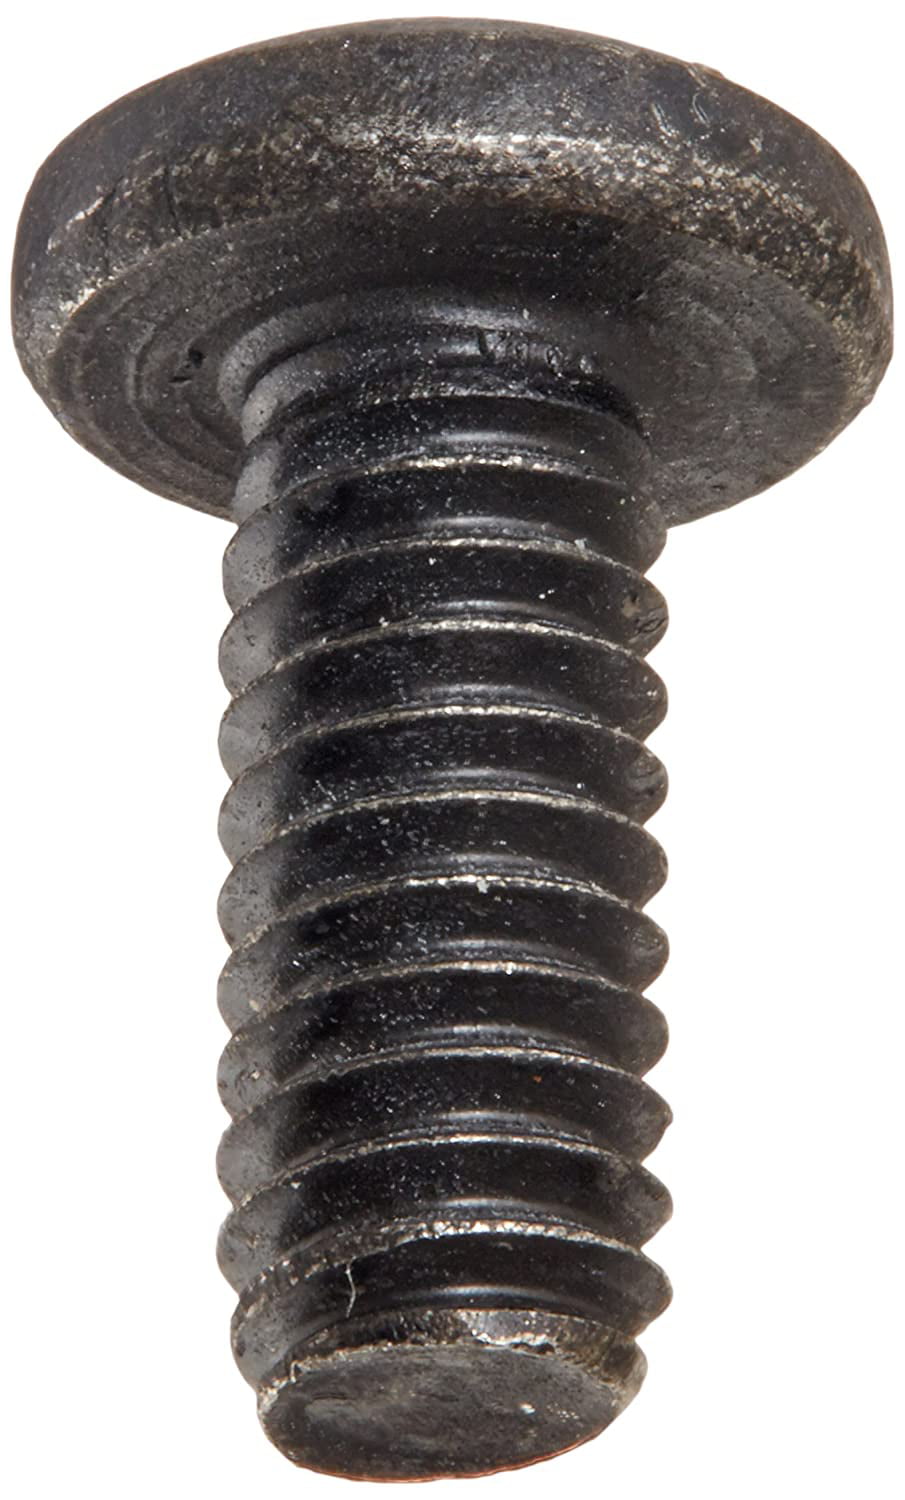 #4-40 Thread Size Pack of 50 Meets MS-51957 Black Oxide Finish 3/8 Length Small Parts MS51957-15B #1 Phillips Drive 18-8 Stainless Steel Pan Head Machine Screw Fully Threaded 3/8 Length USA Made 